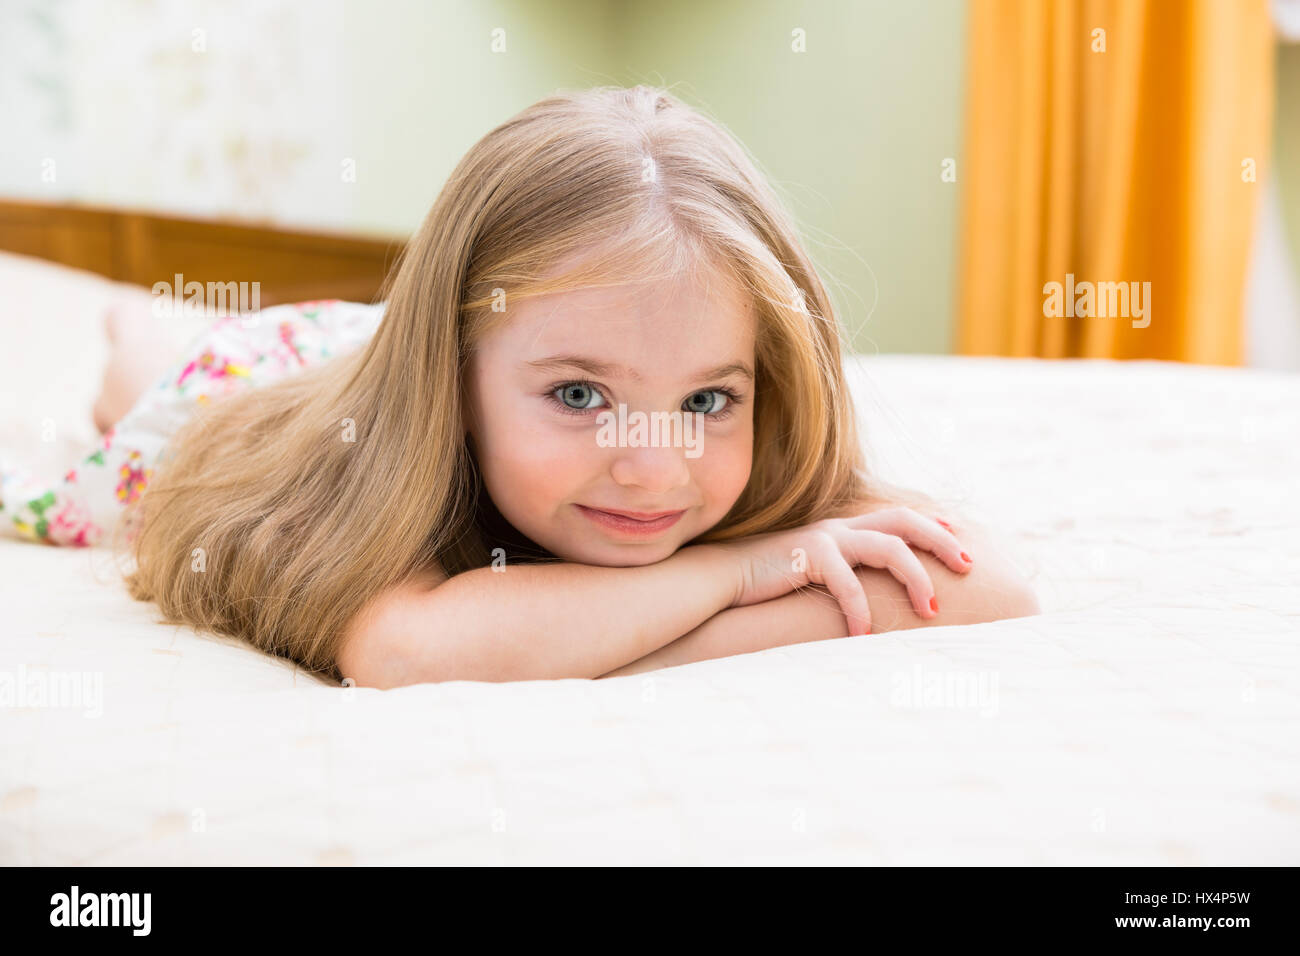 Adorable little girl awaked up in her bed Stock Photo - Alamy